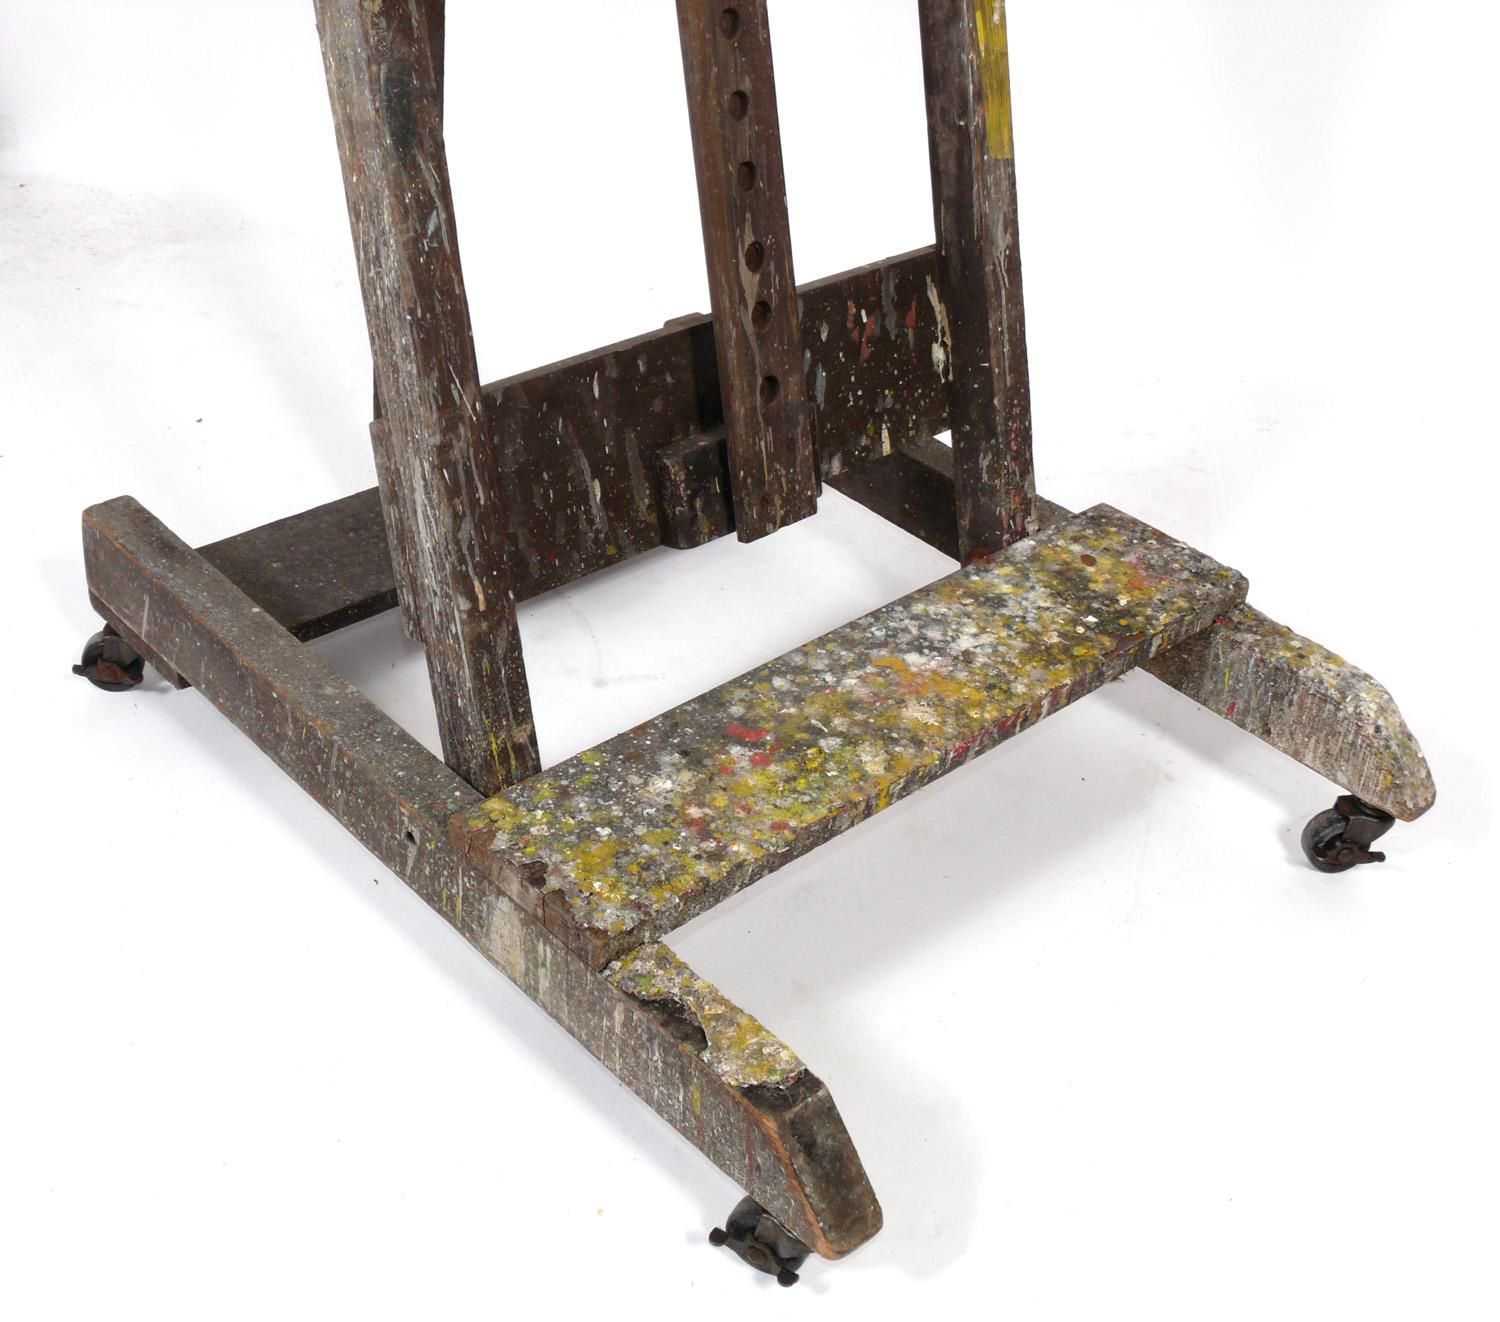 Paint Covered Artist's Easel, American, circa 1950s. This piece retains it's wonderful original paint covered patina. It can be used to hold a large painting or as a flat screen TV stand.